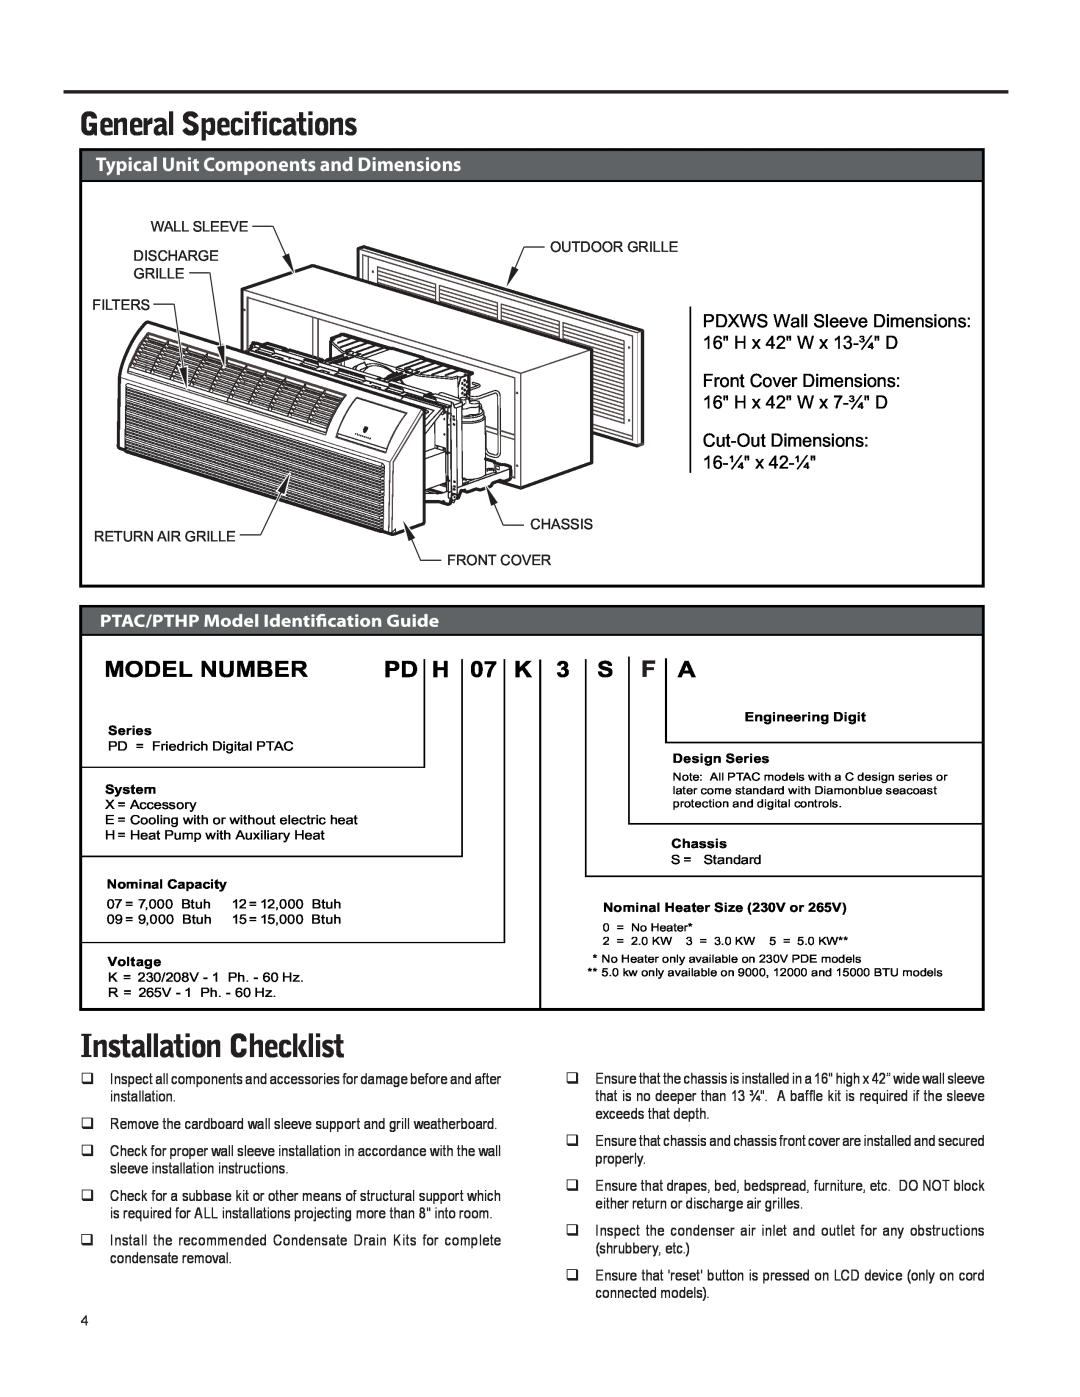 Friedrich 920-087-09 (12/10) operation manual General Specifications, Installation Checklist, Model Number 